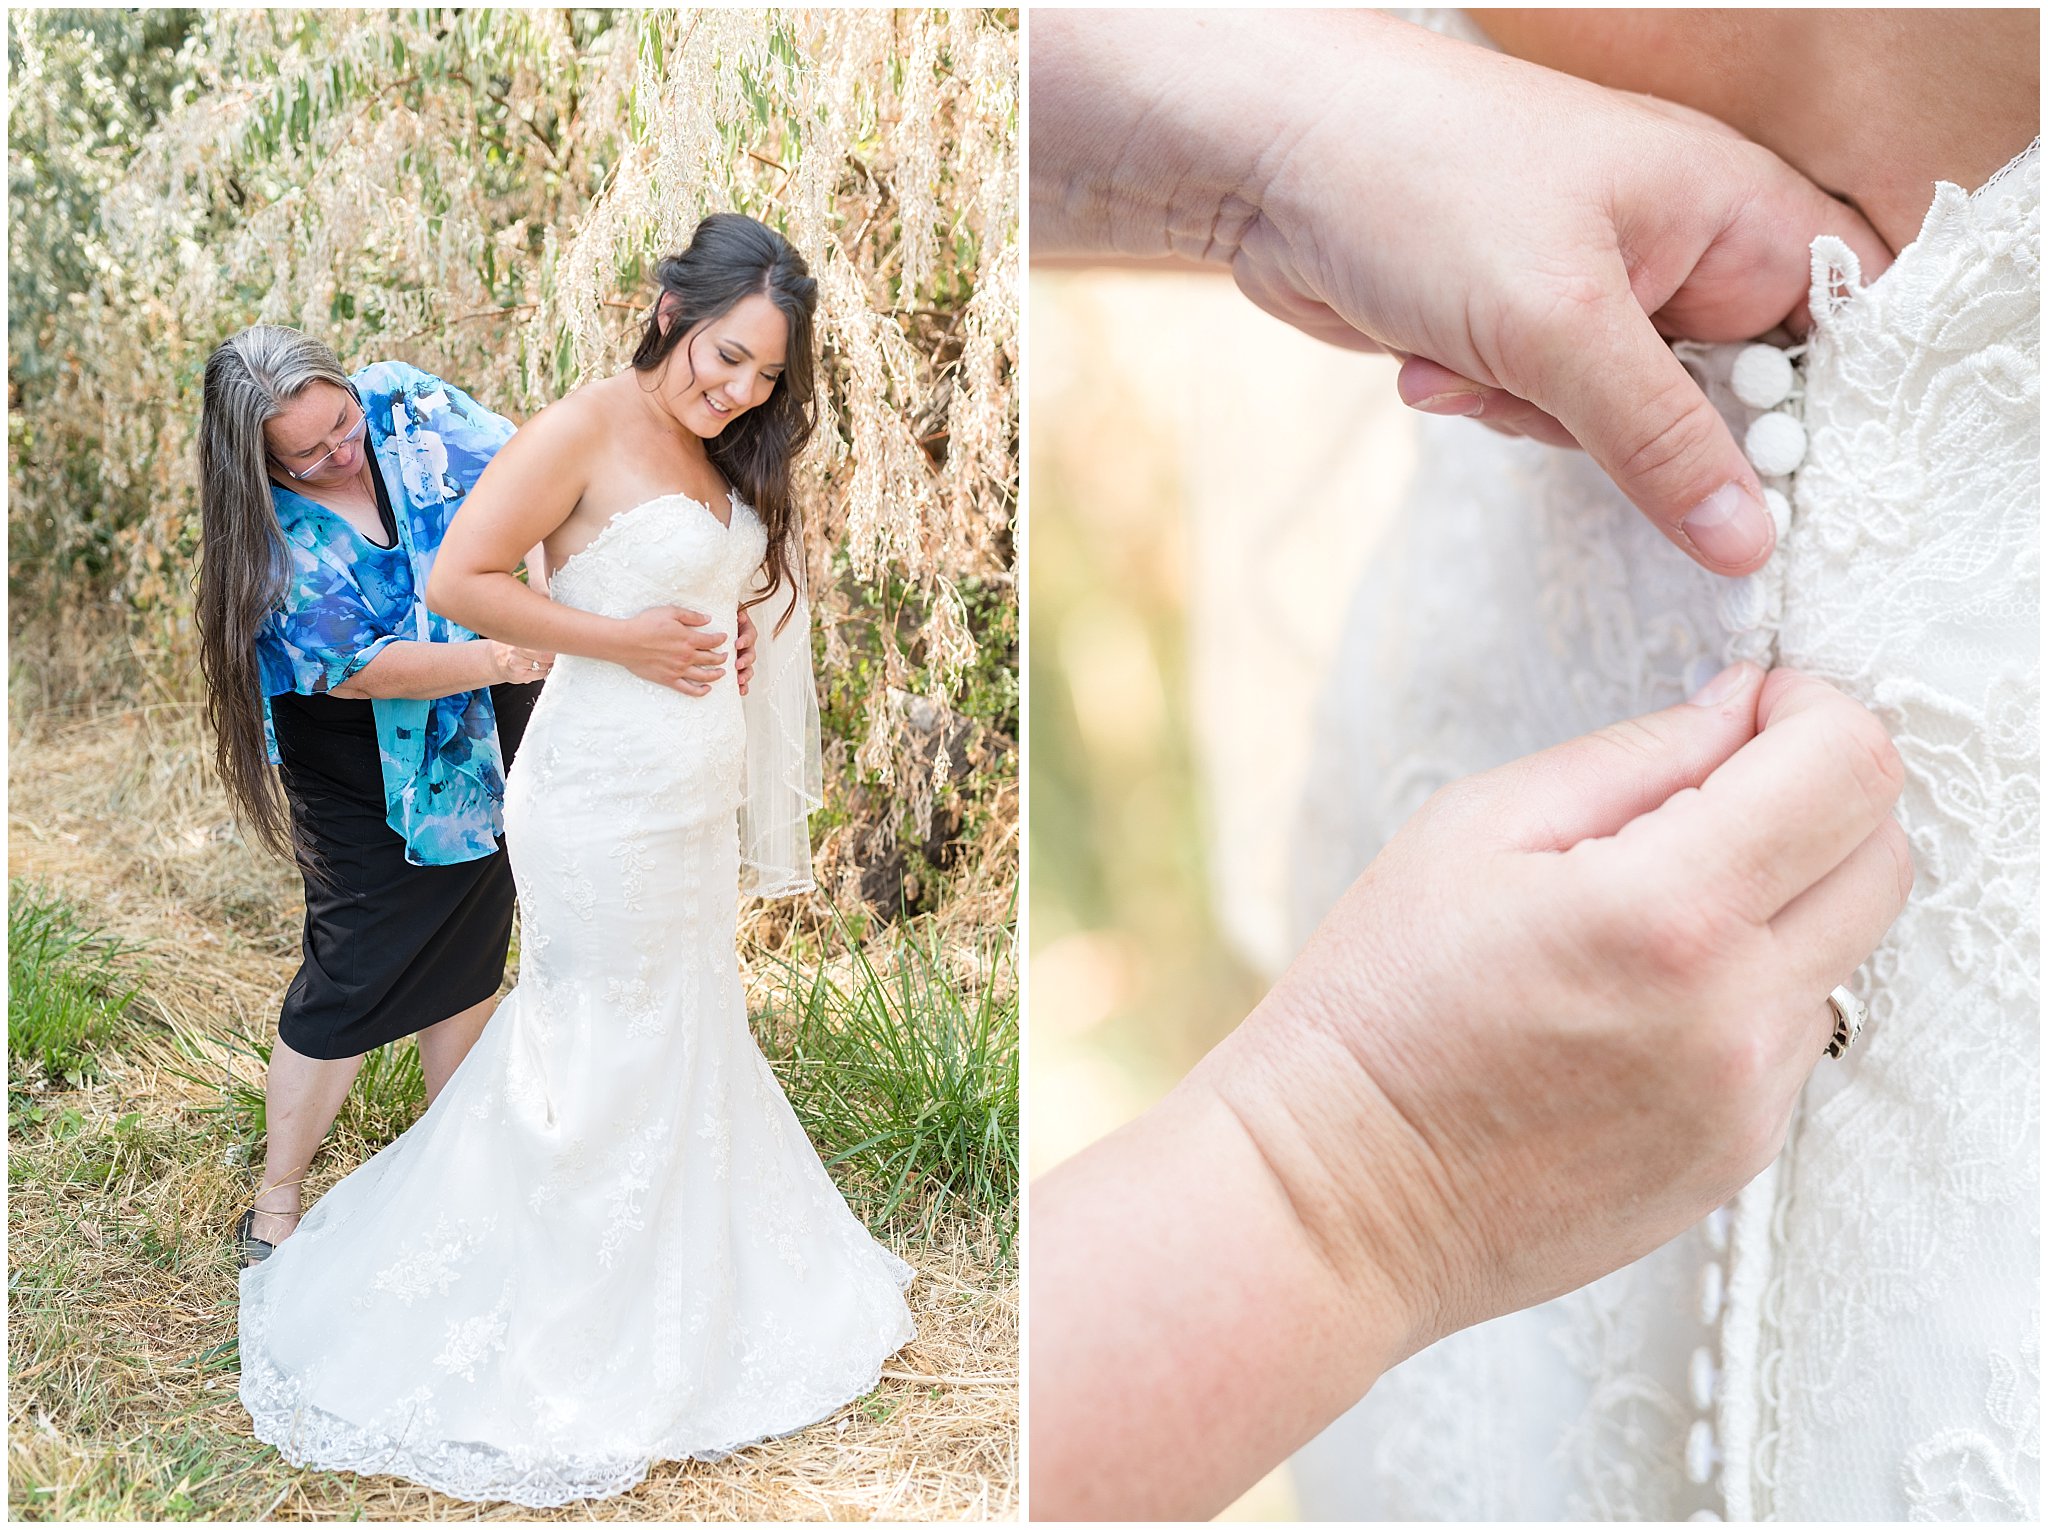 Detail shots and Mother of the Bride buttoning up back of wedding dress | Davis County Outdoor Wedding | Jessie and Dallin Photography